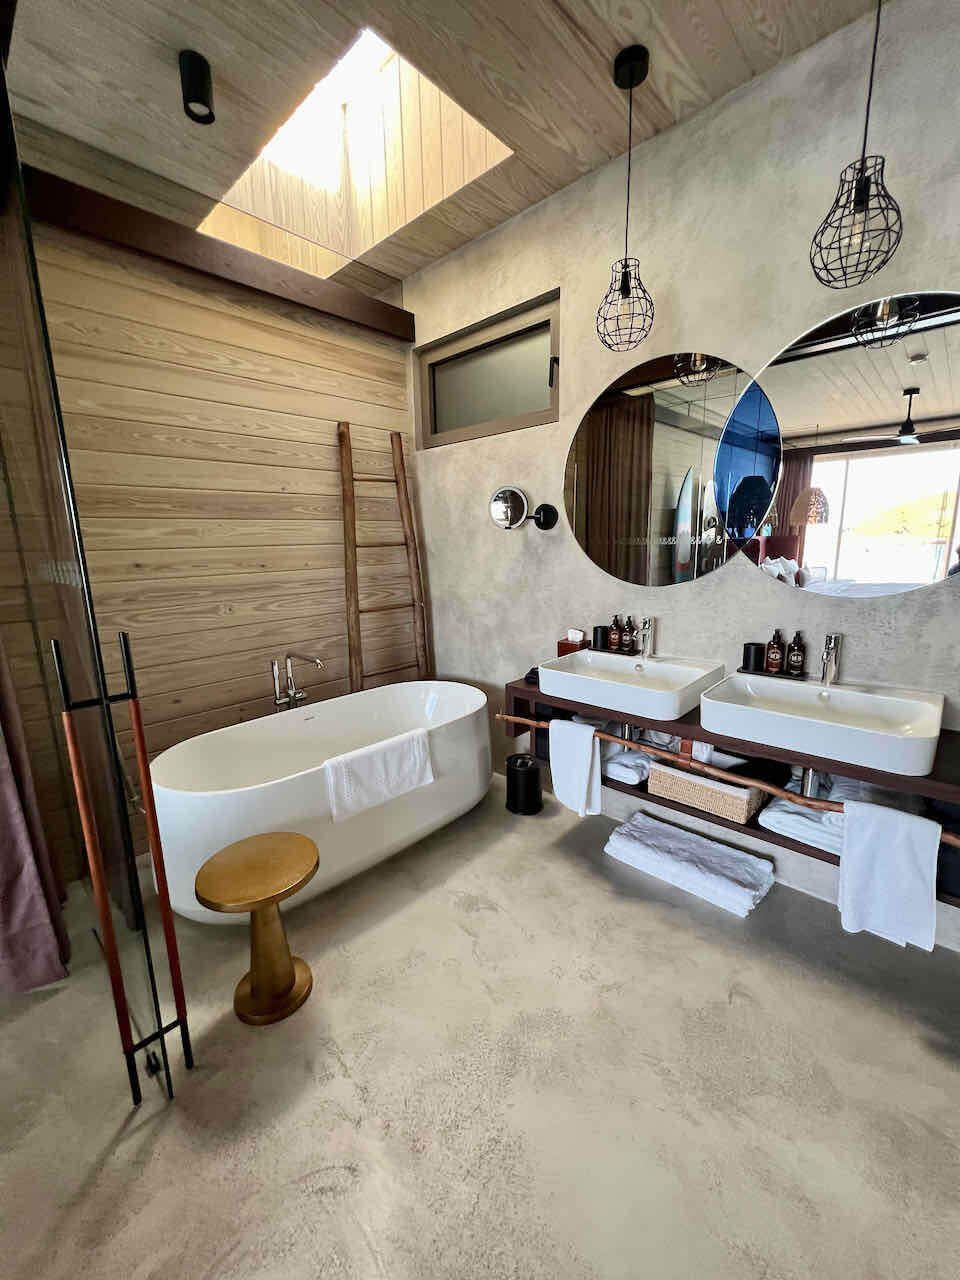 Industrial style bathroom at small hotel Saba Rock in the BVI.